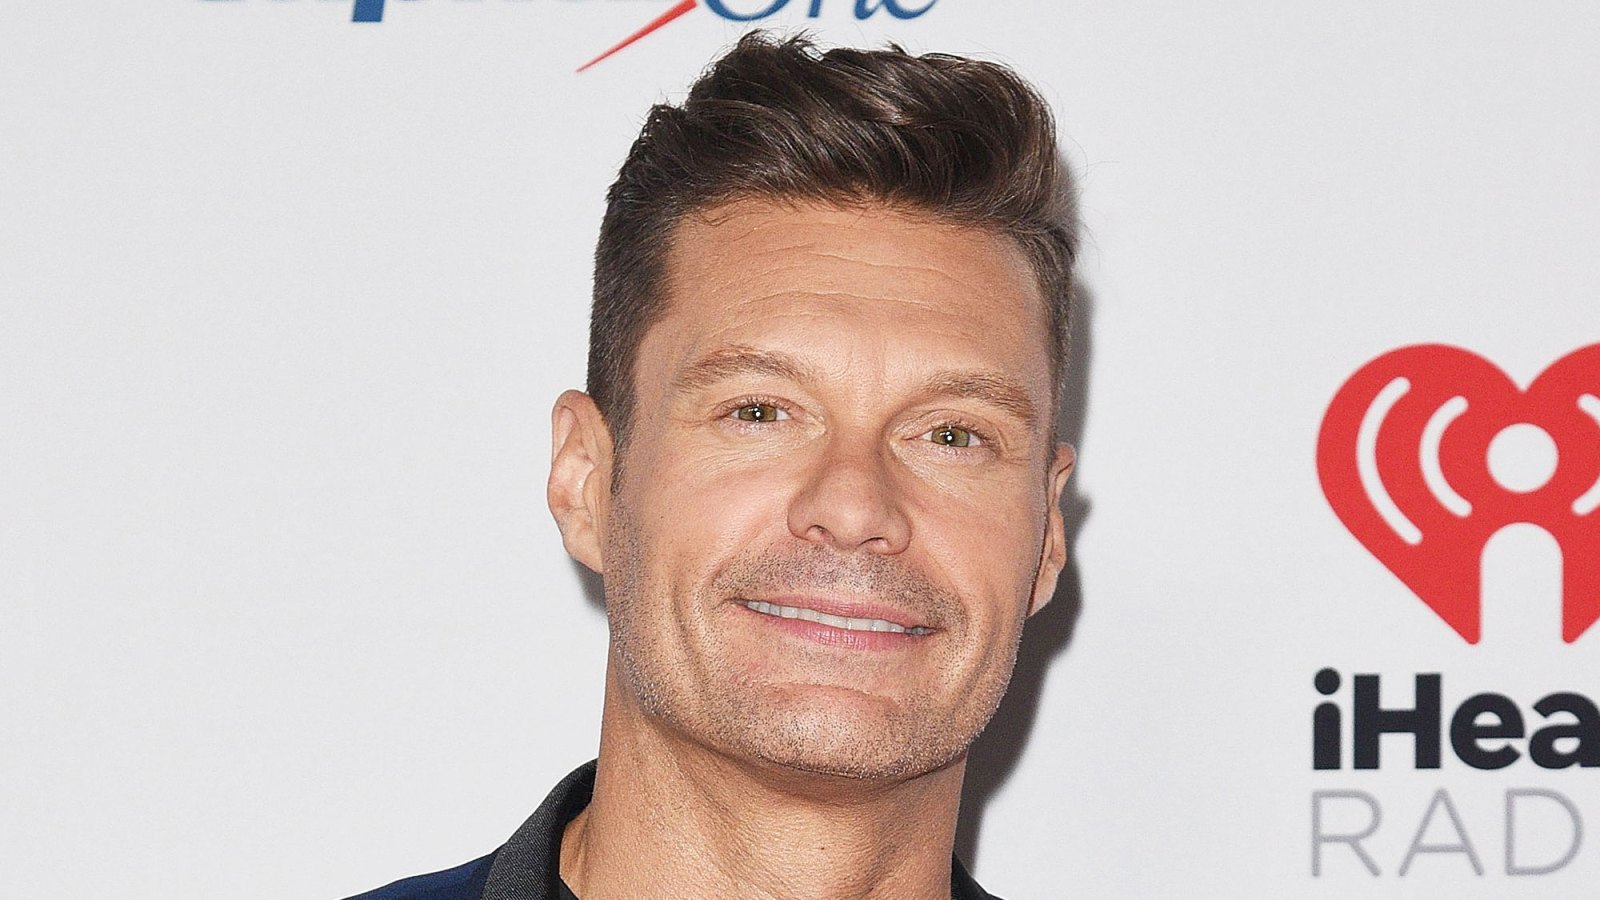 Ryan Seacrest On His Famous Chair Fall